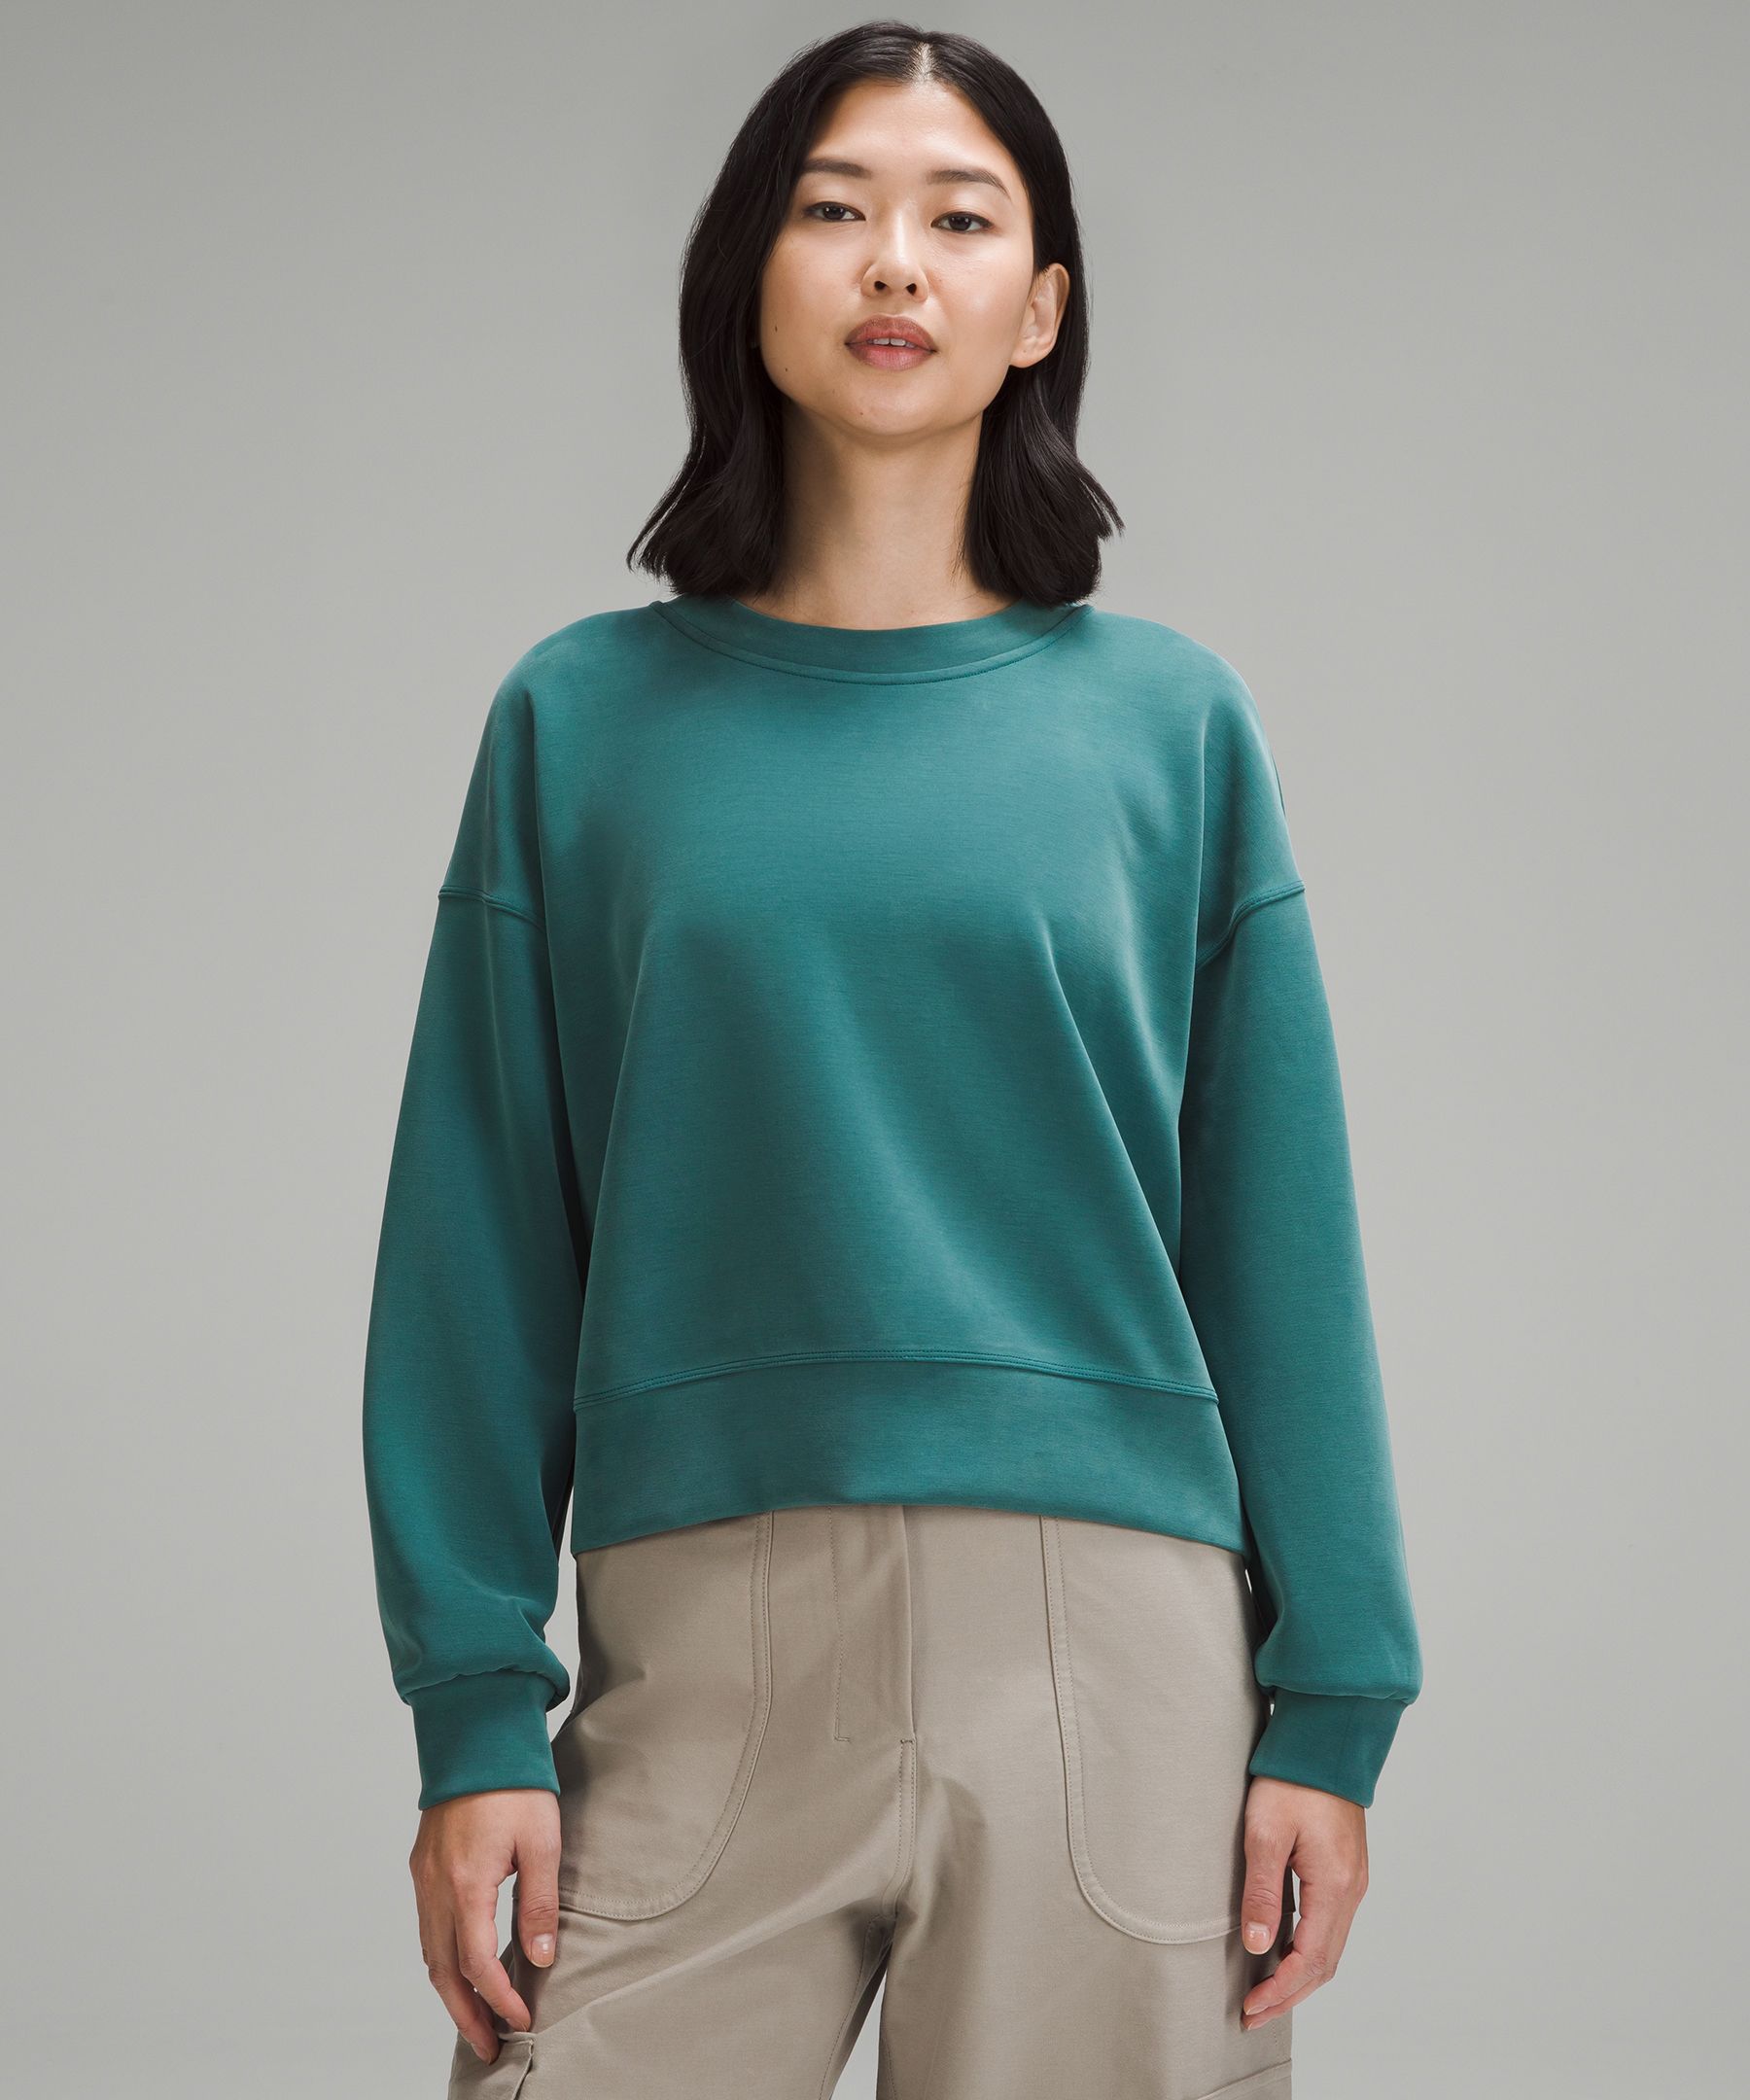 Supersoft Loose Crop Sweater Green